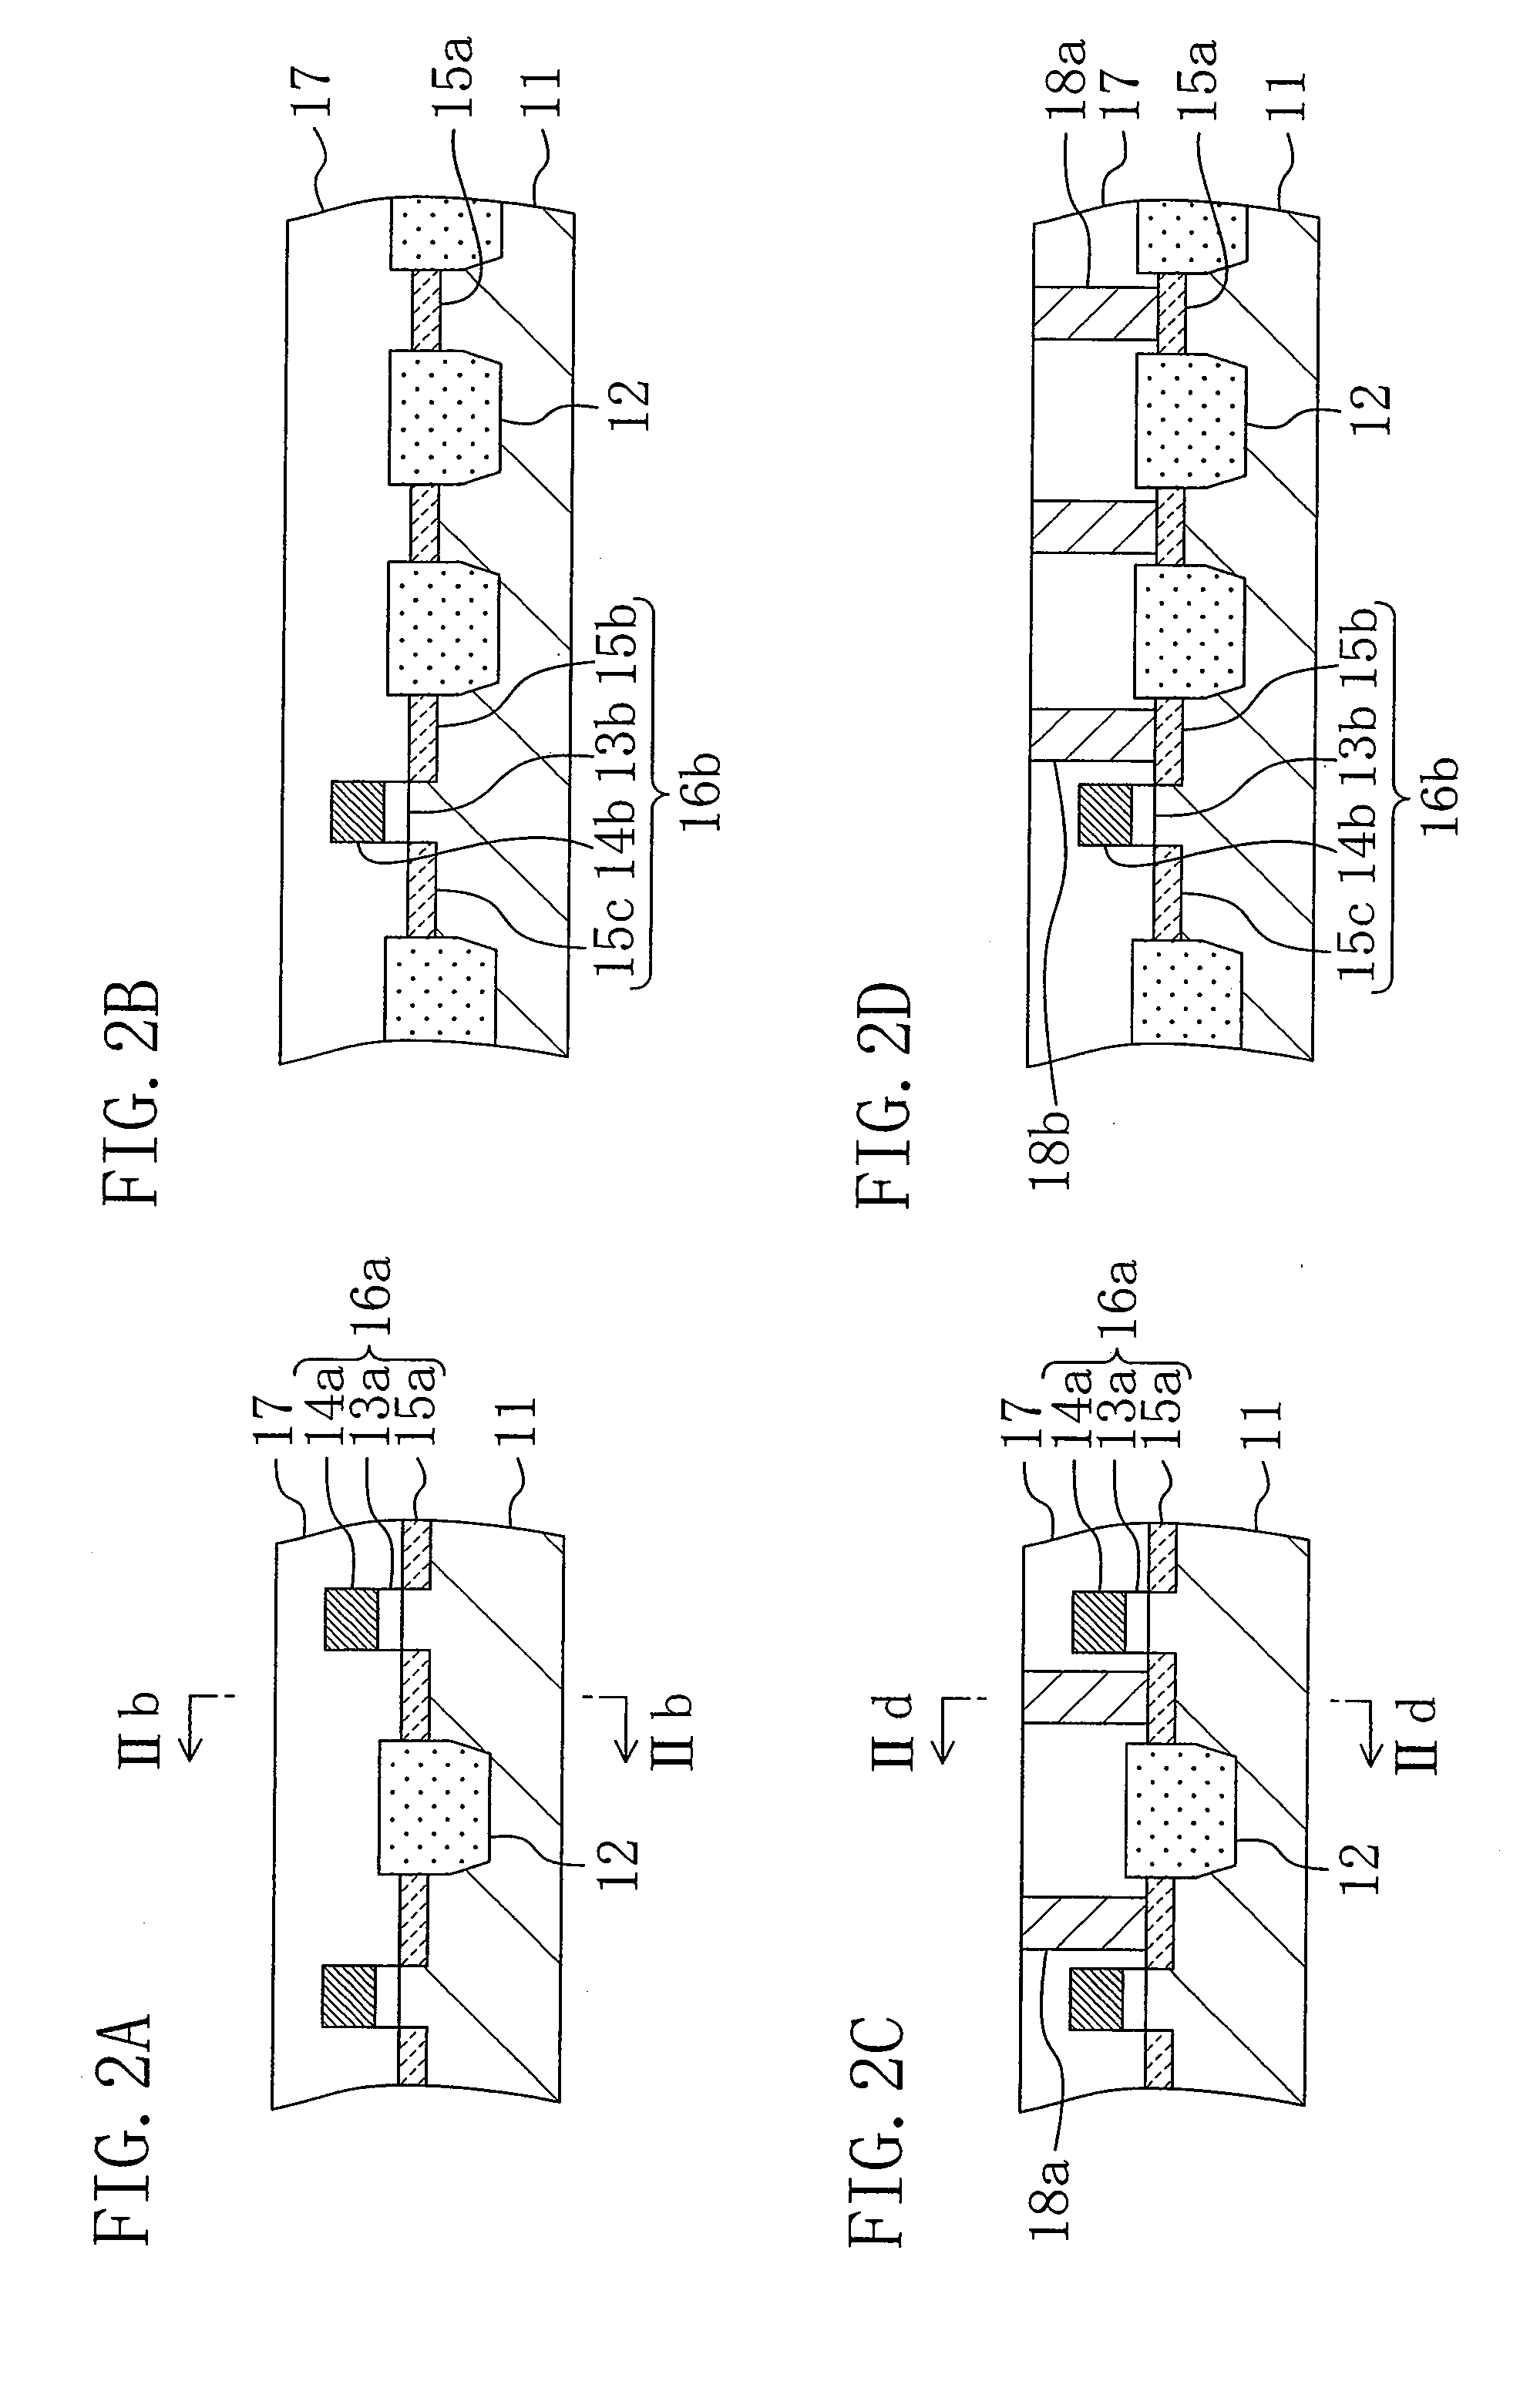 Capacitor insulating film, method for fabricating the same, capacitor element, method for fabricating the same, semiconductor memory device, and method for fabricating the same